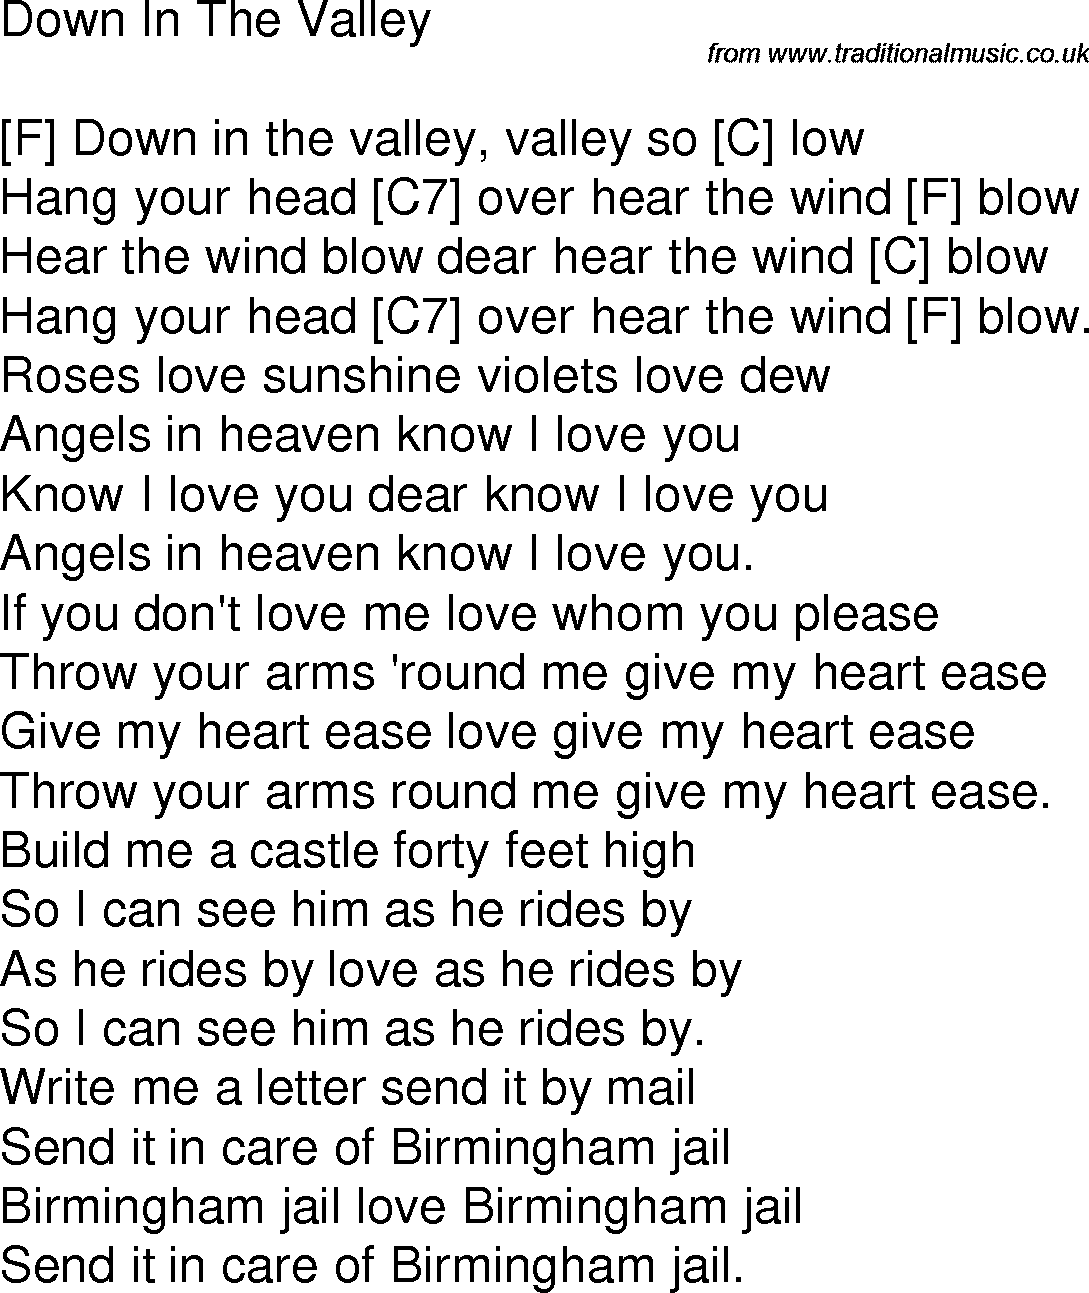 Old time song lyrics with chords for Down In The Valley F